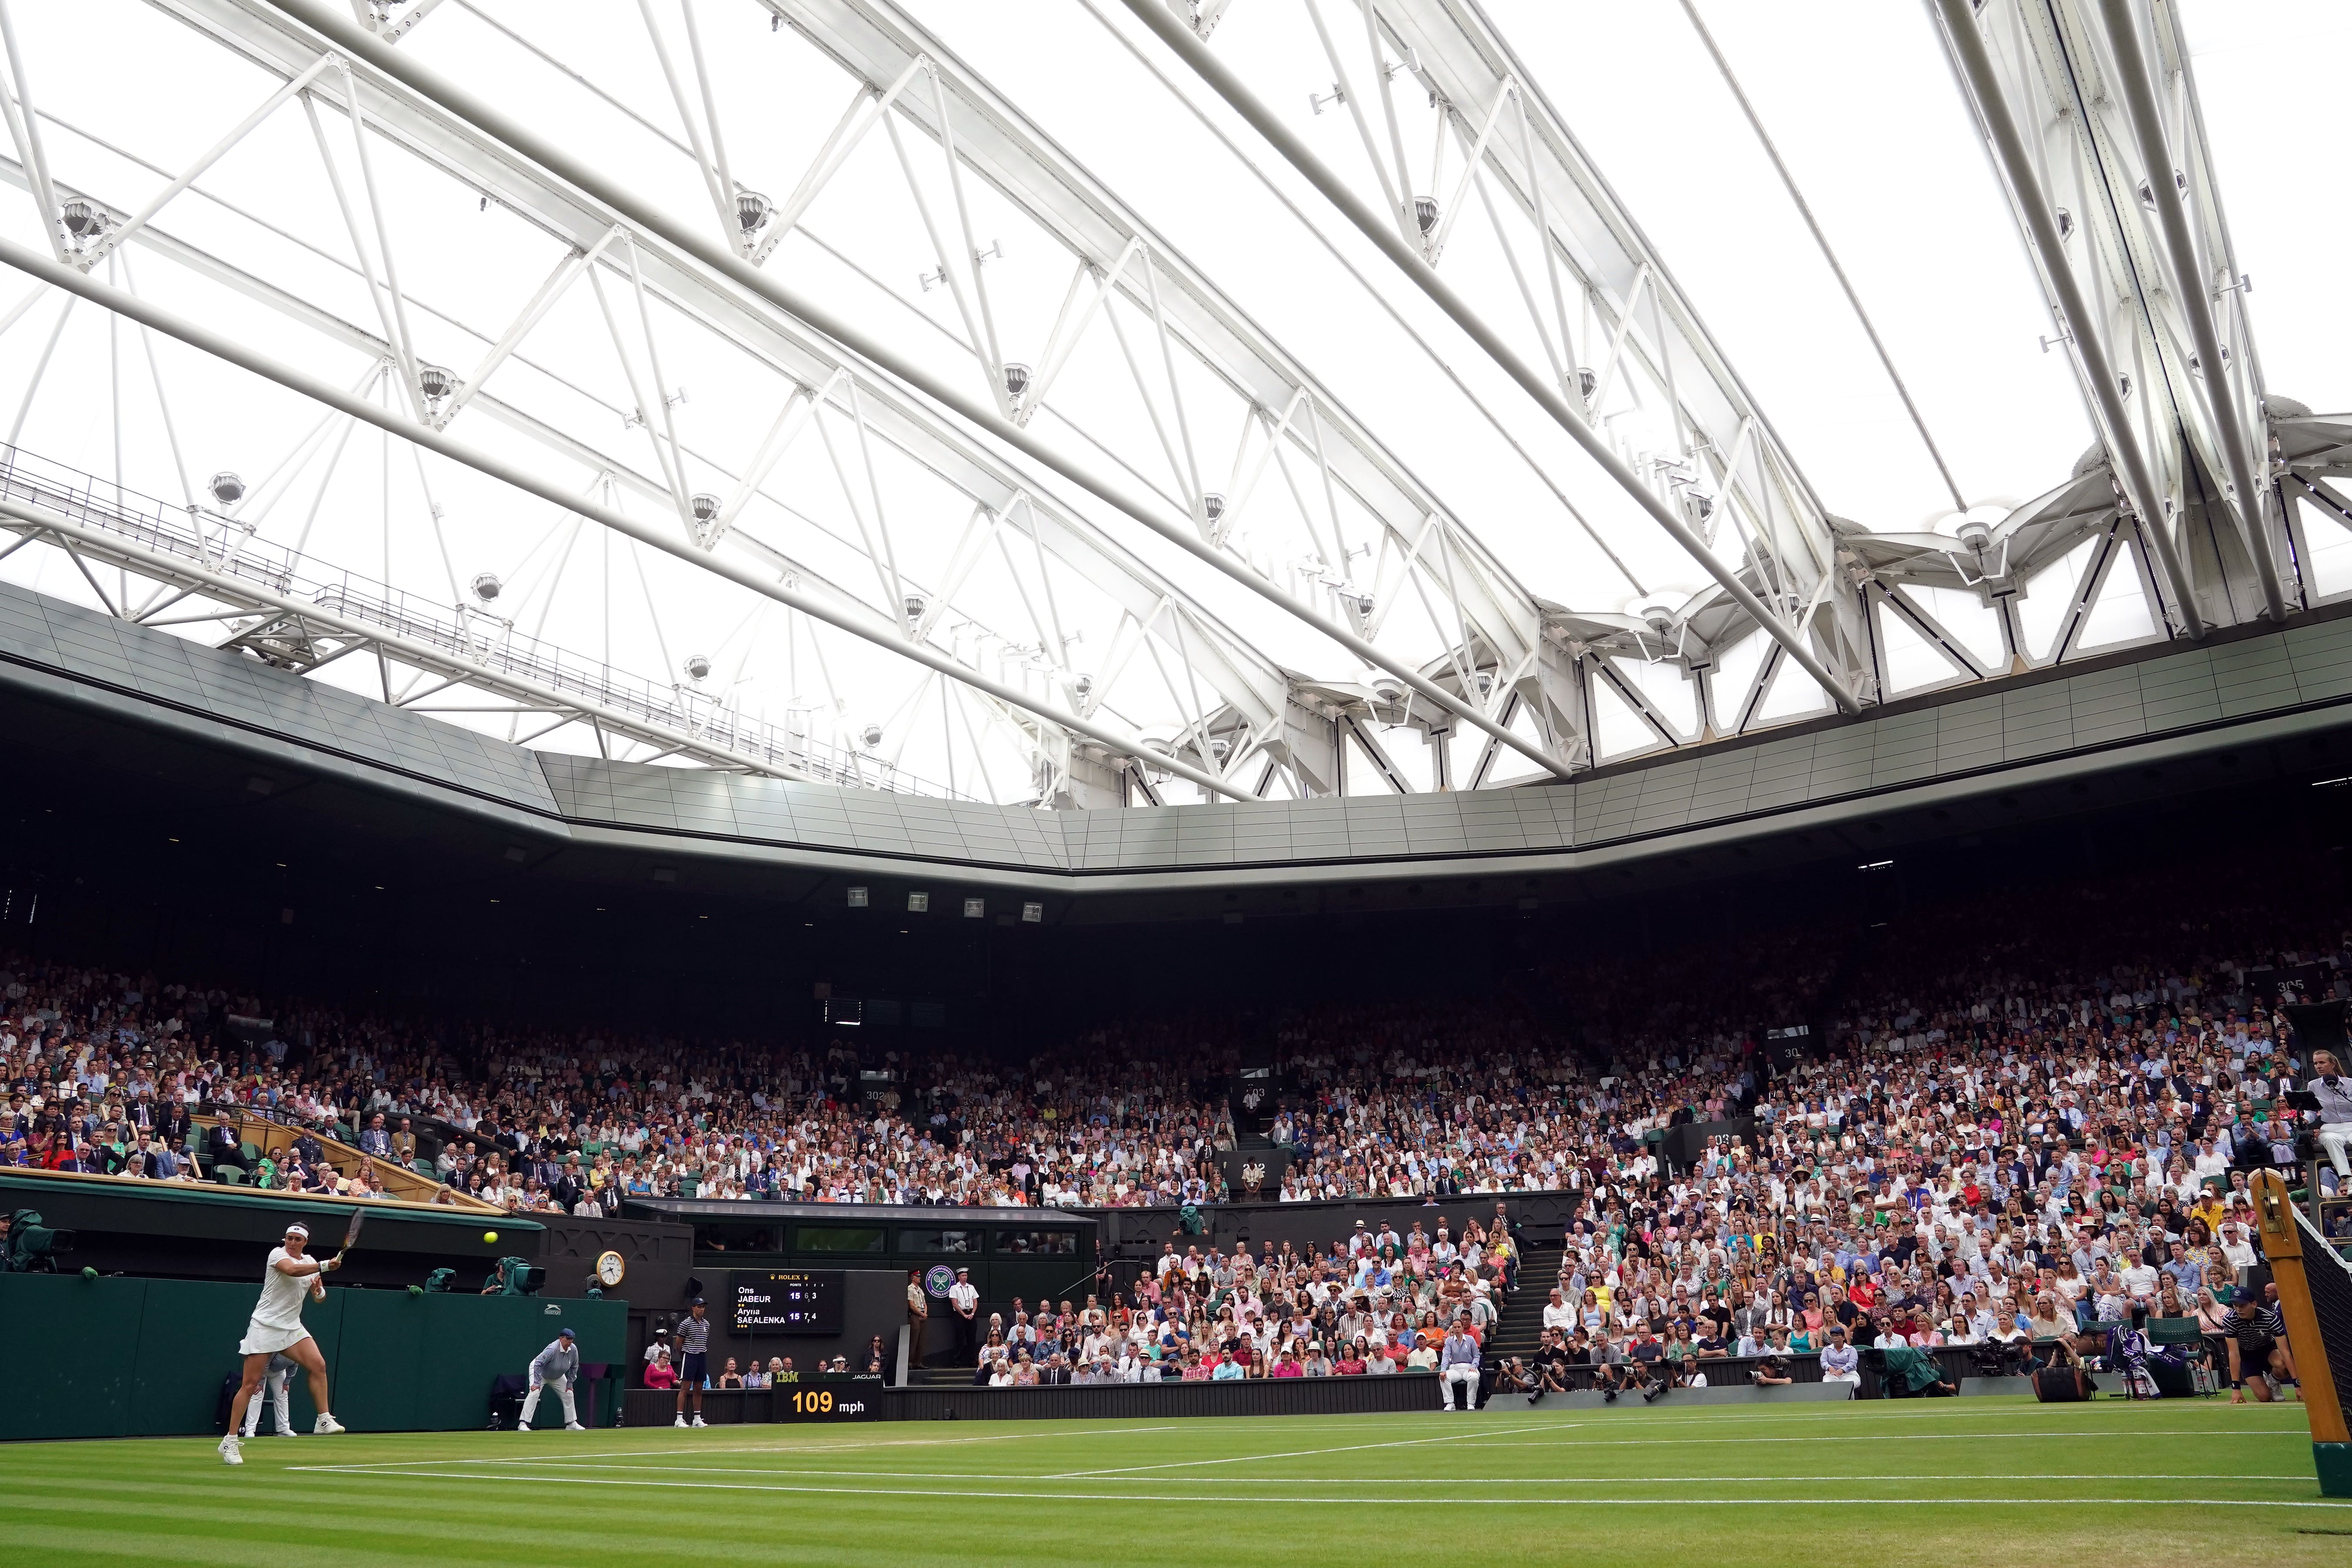 AELTC hopes the development will increase the capacity for the championships to 50,000